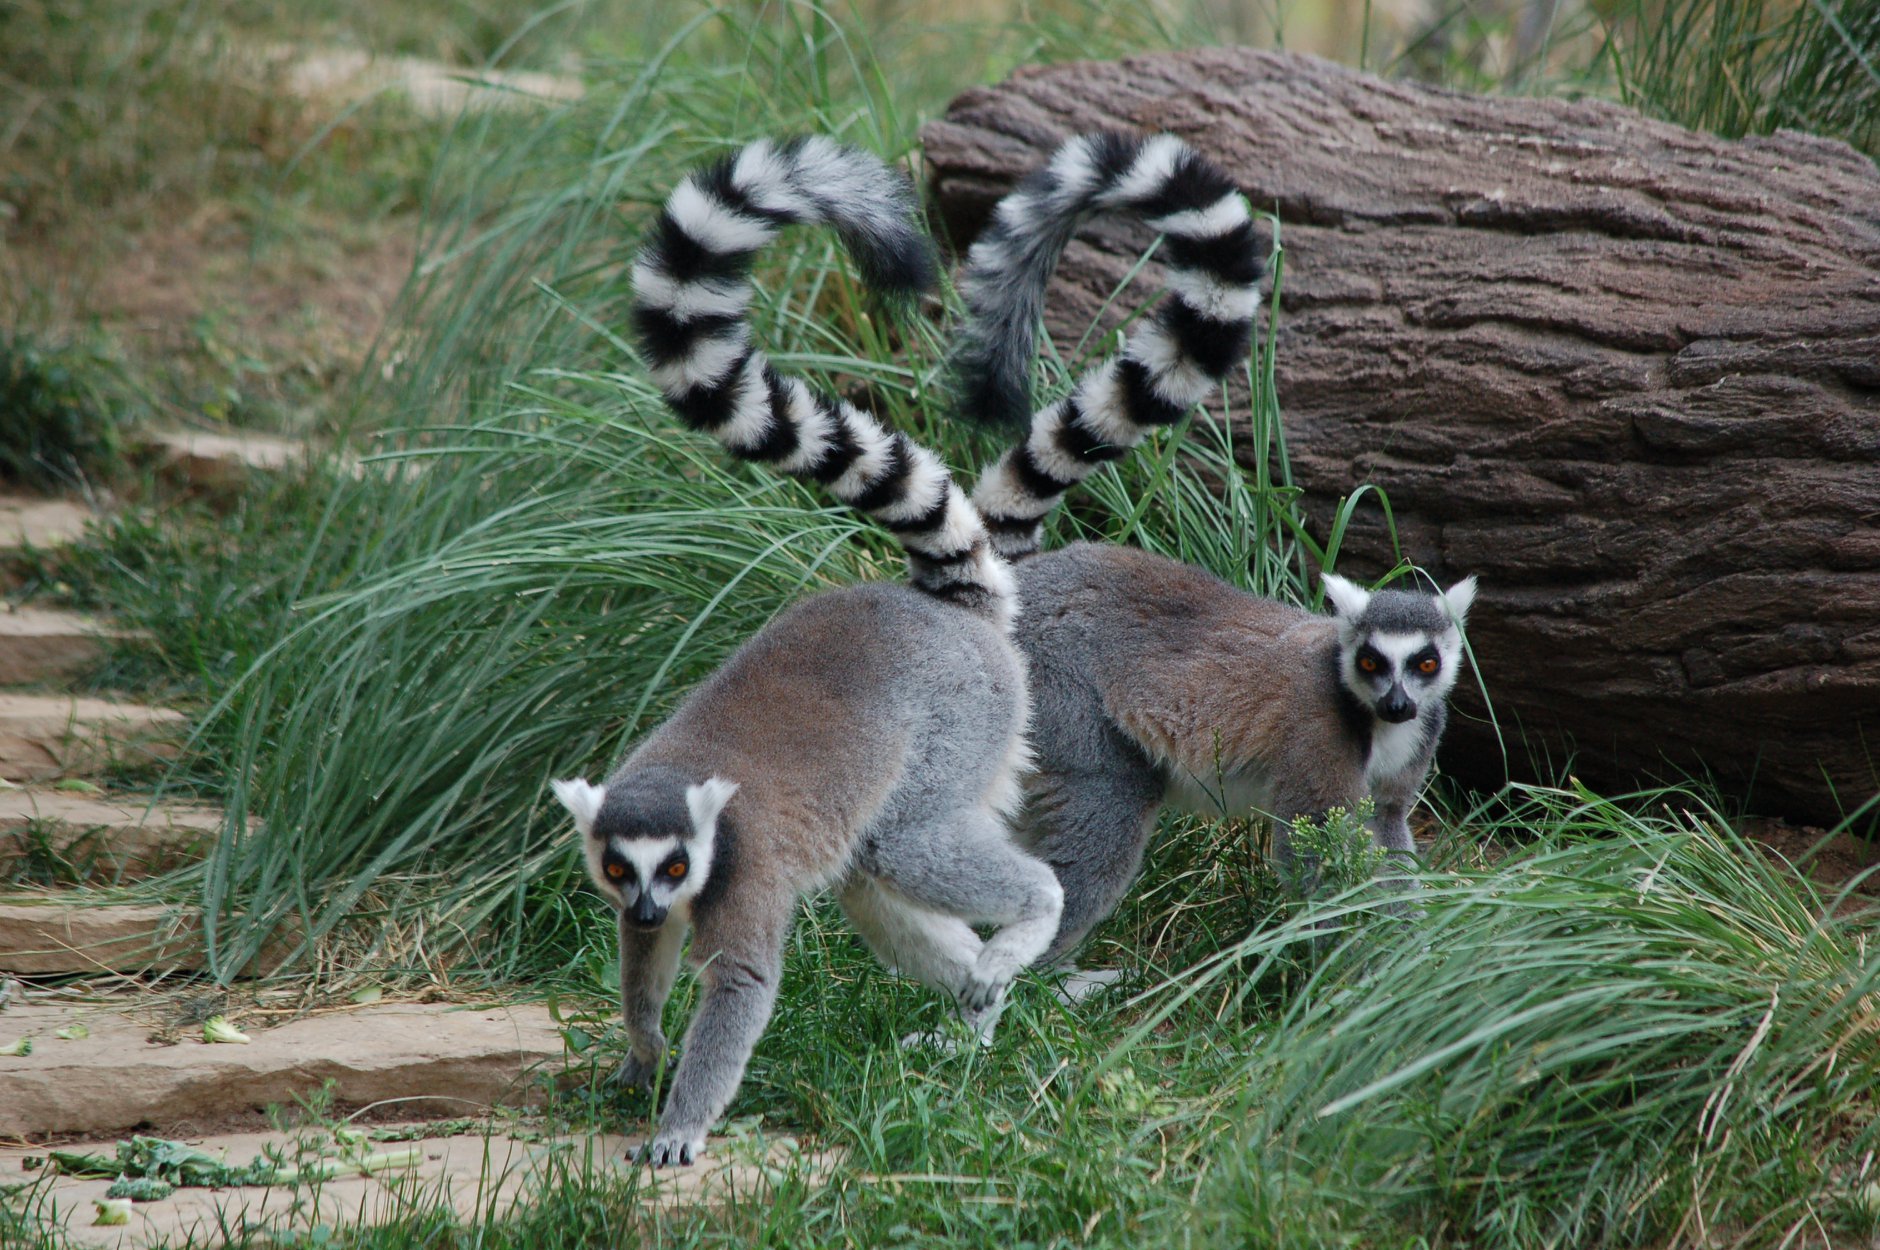 Ring-tailed lemurs frolicing in their area